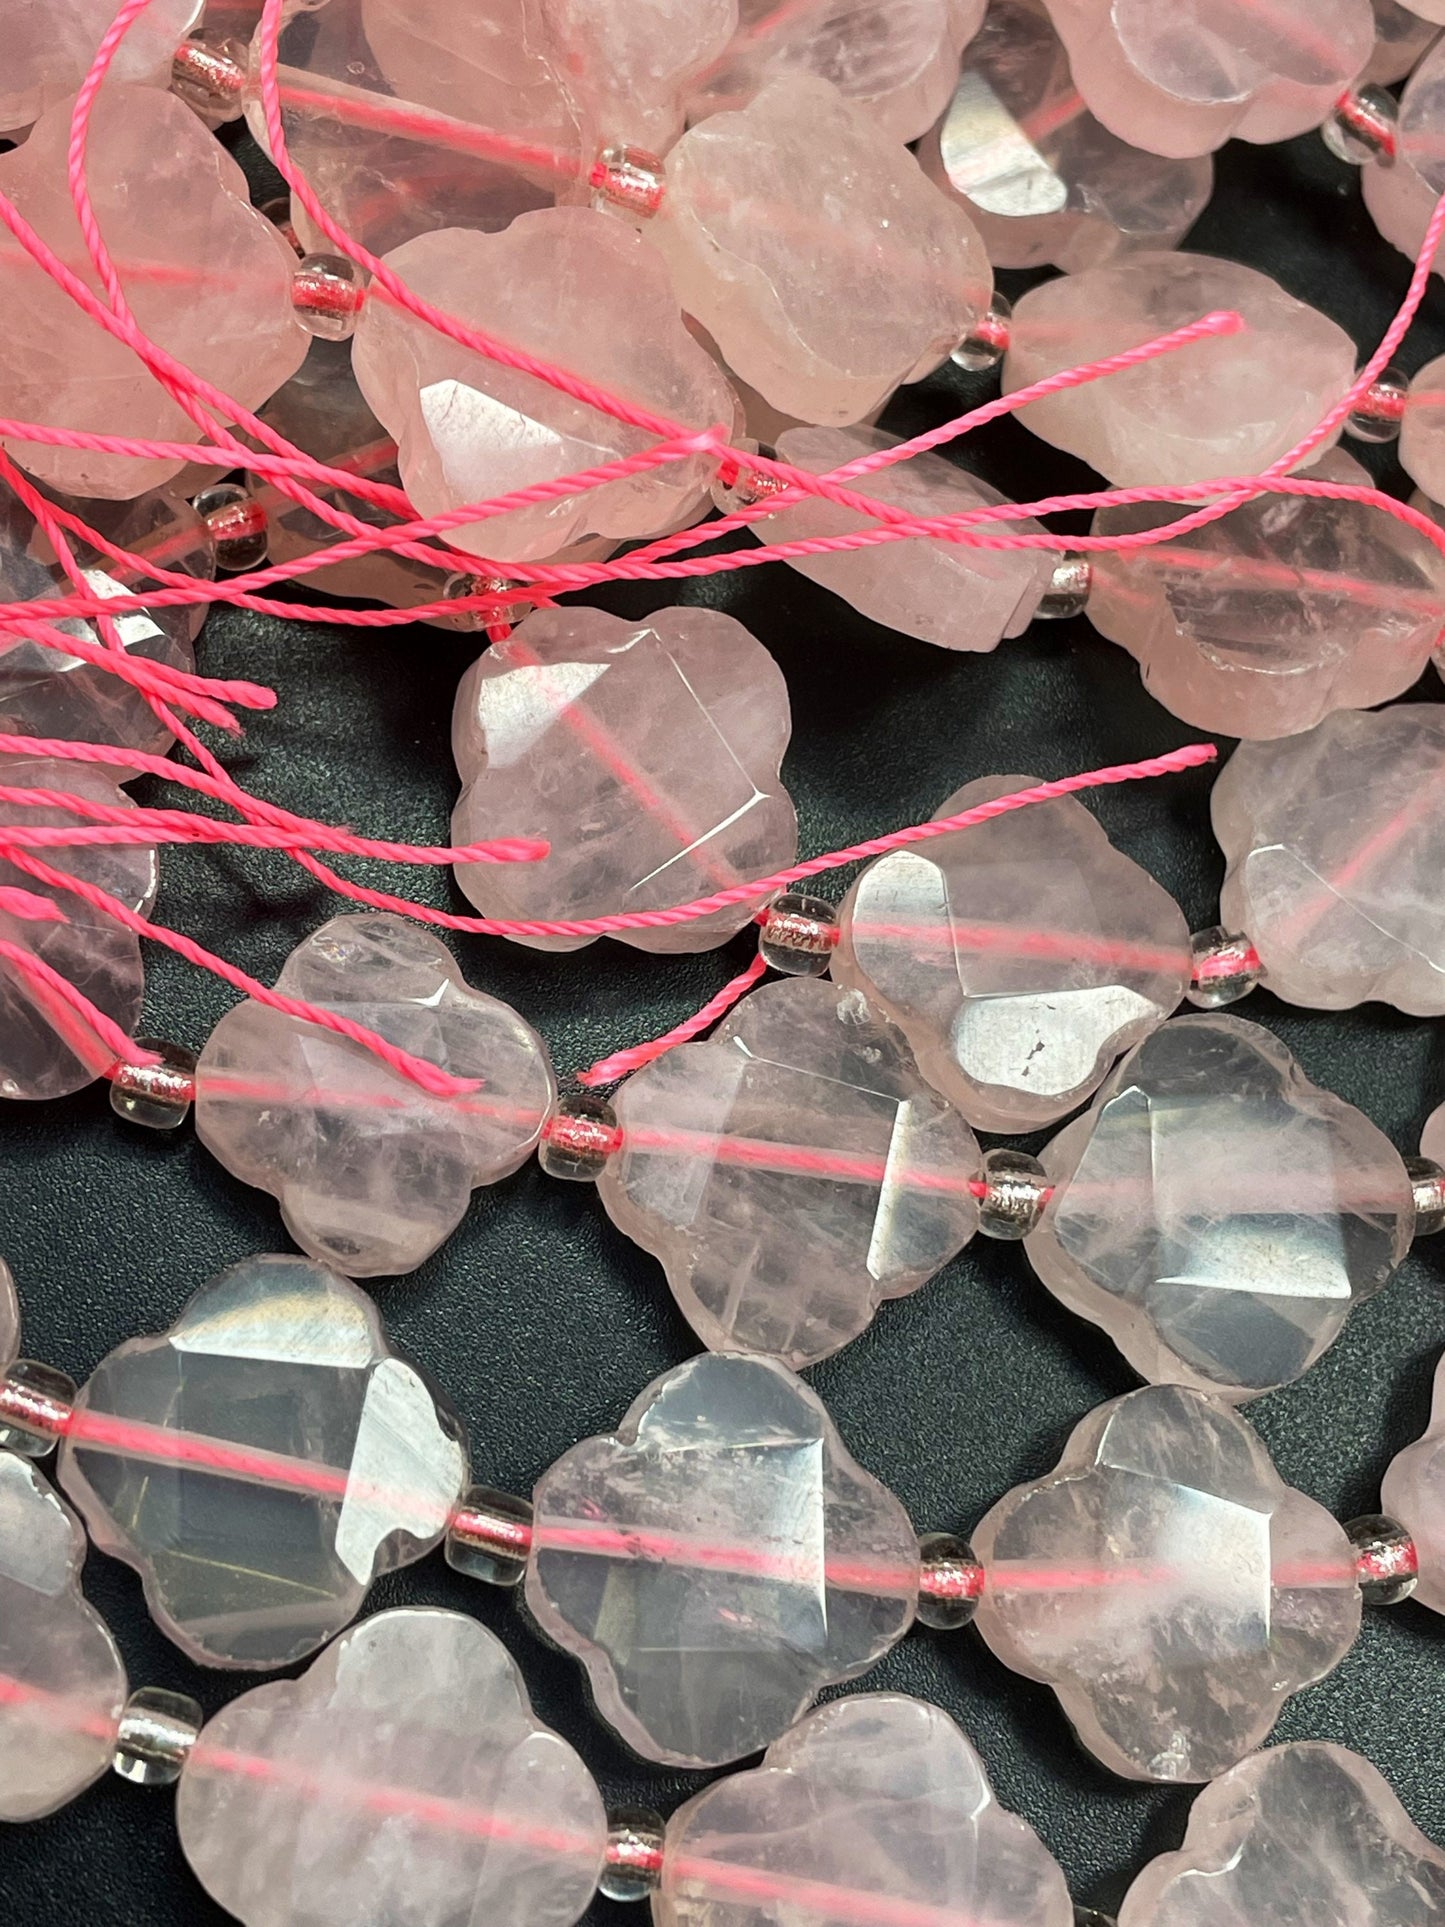 AAA Natural Rose Quartz Gemstone Bead Faceted 17mm Flower Clover Shape, Gorgeous Natural Pink Rose Quartz Gemstone Bead